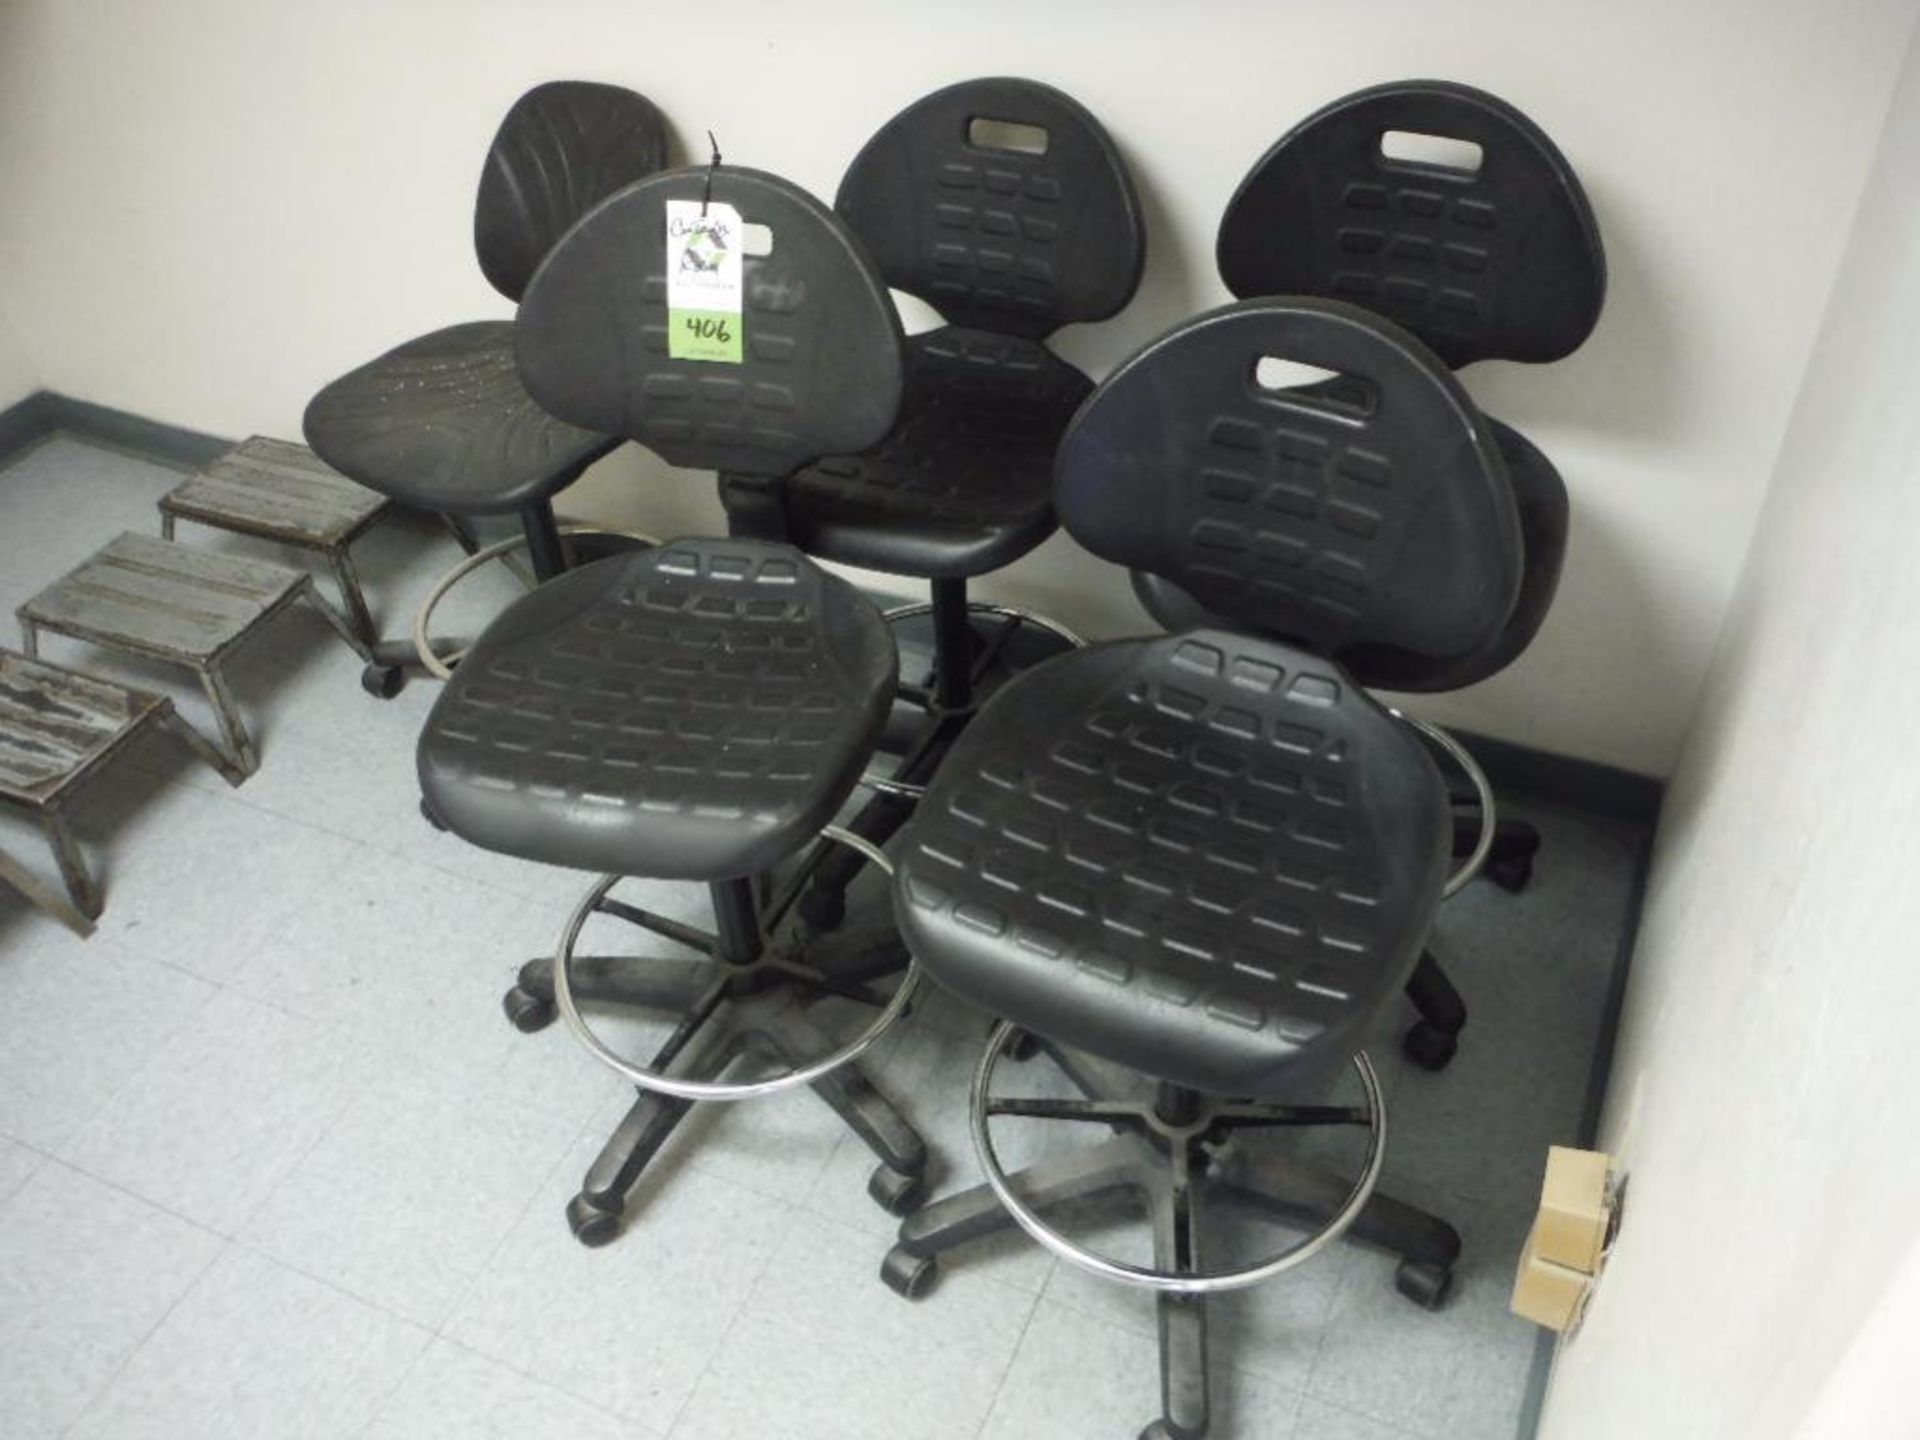 Contents of hallway, office supplies, (4) OSHA approved production chairs, (4) step stools **